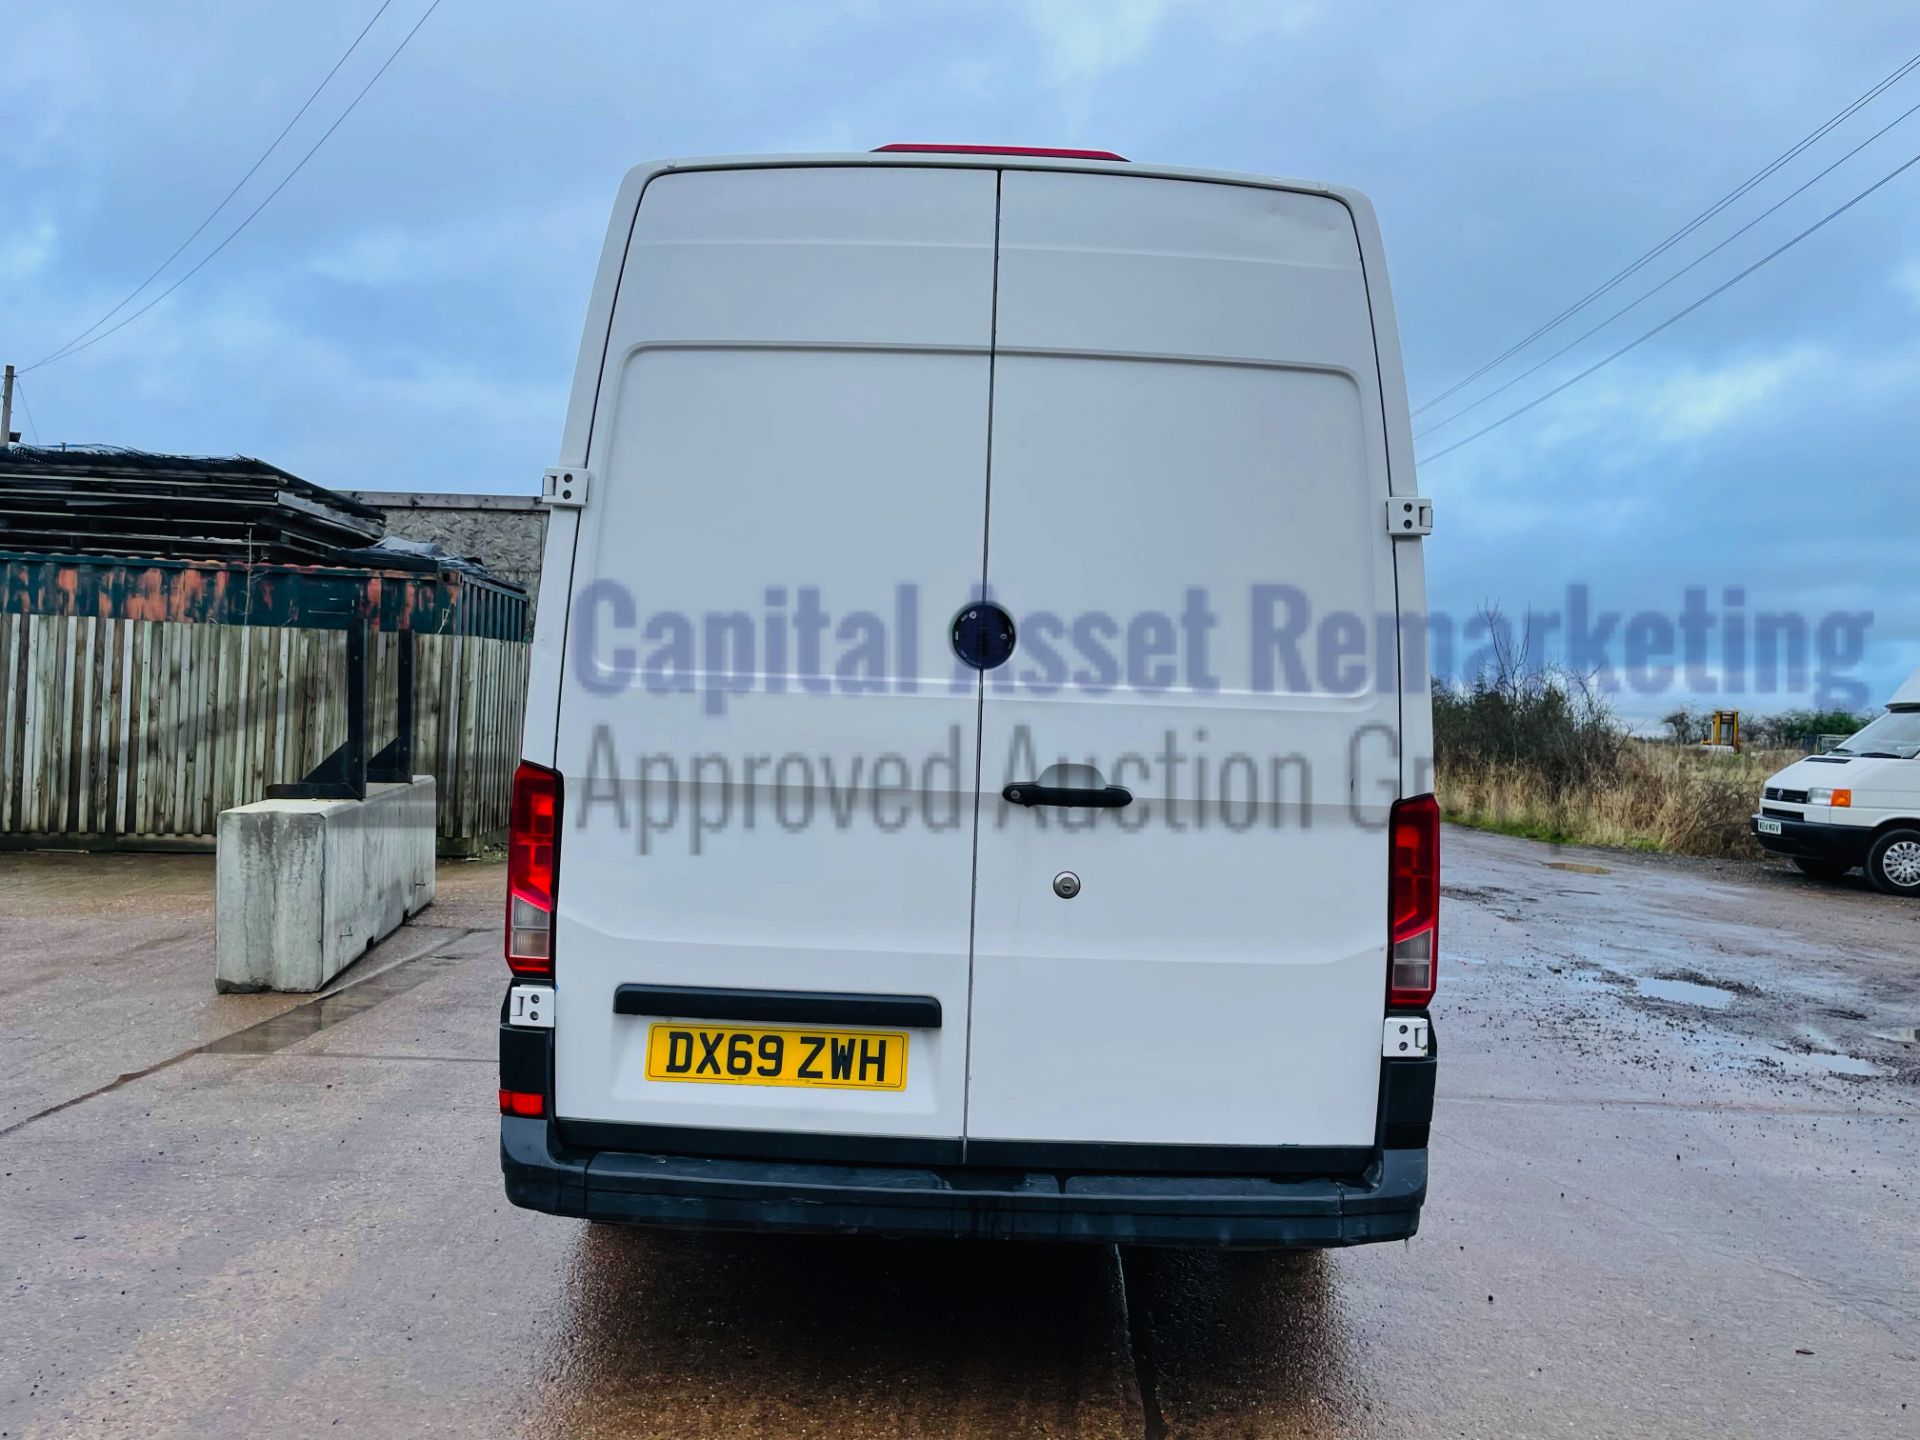 (On Sale) VOLKSWAGEN CRAFTER CR35 *LWB HI-ROOF* (69 REG - EURO 6) '2.0 TDI - 6 SPEED' *LOW MILEAGE* - Image 11 of 37